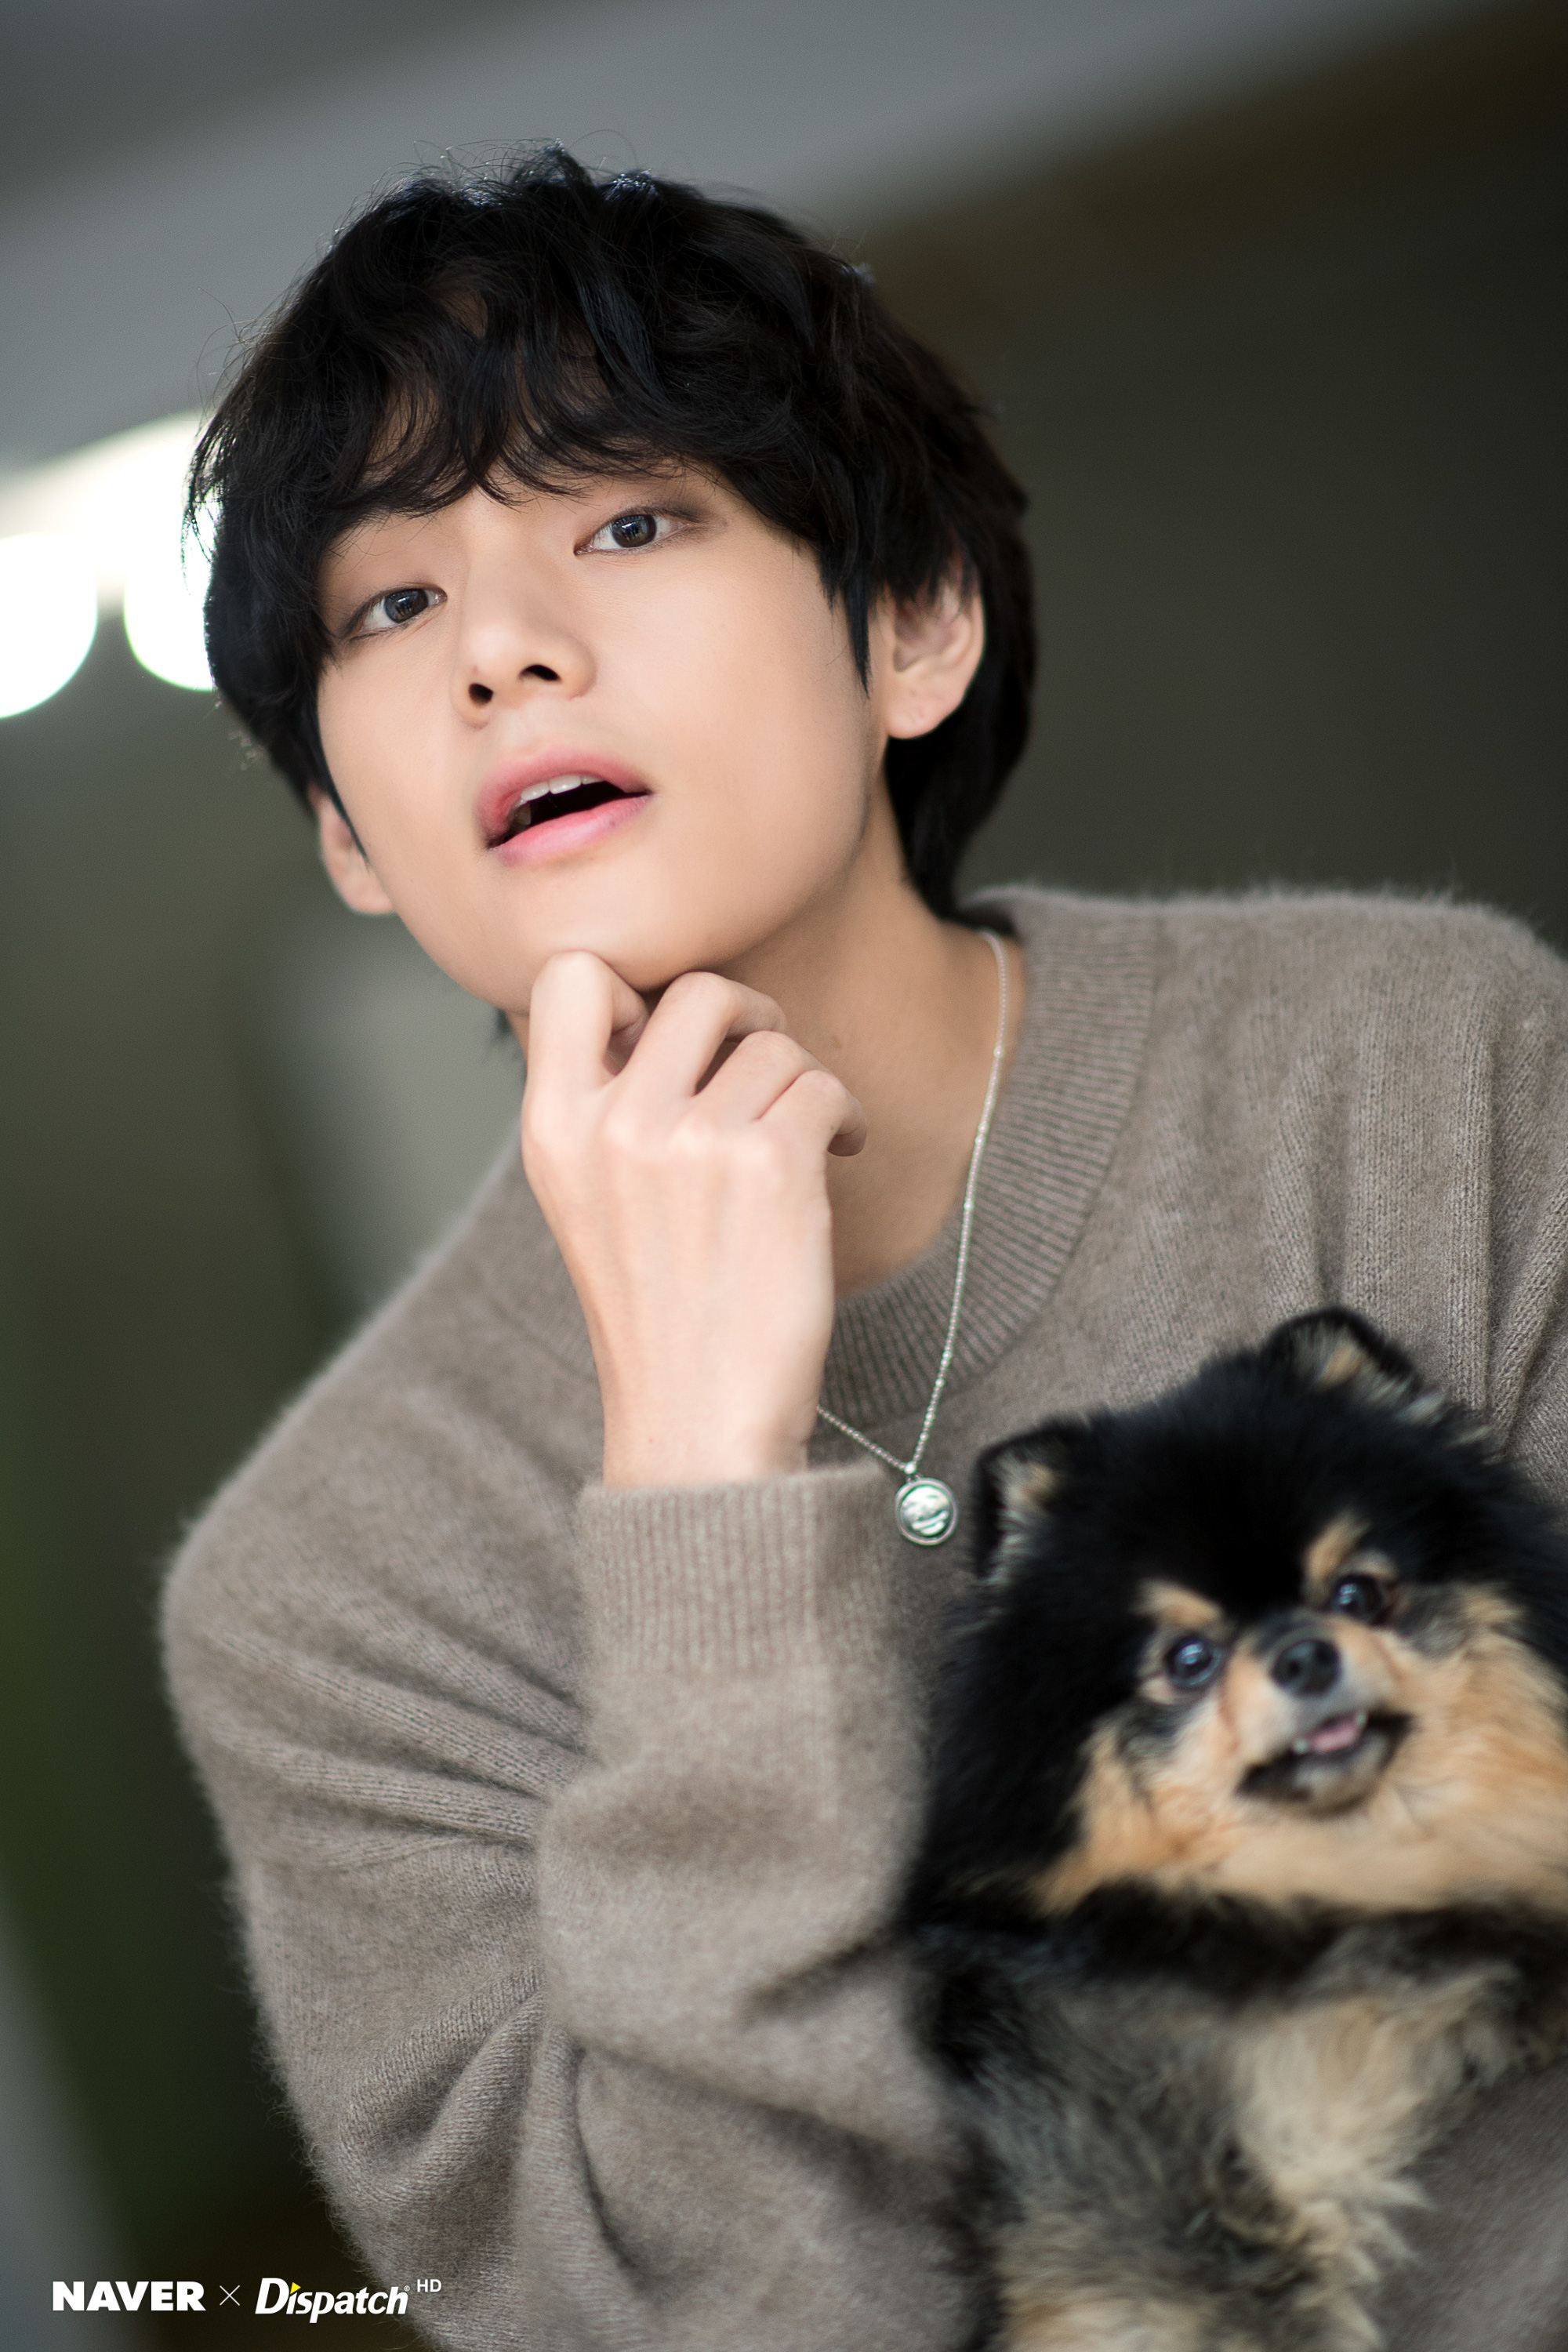  Picture Video Dispatch BTS V With Yeontan 191231 